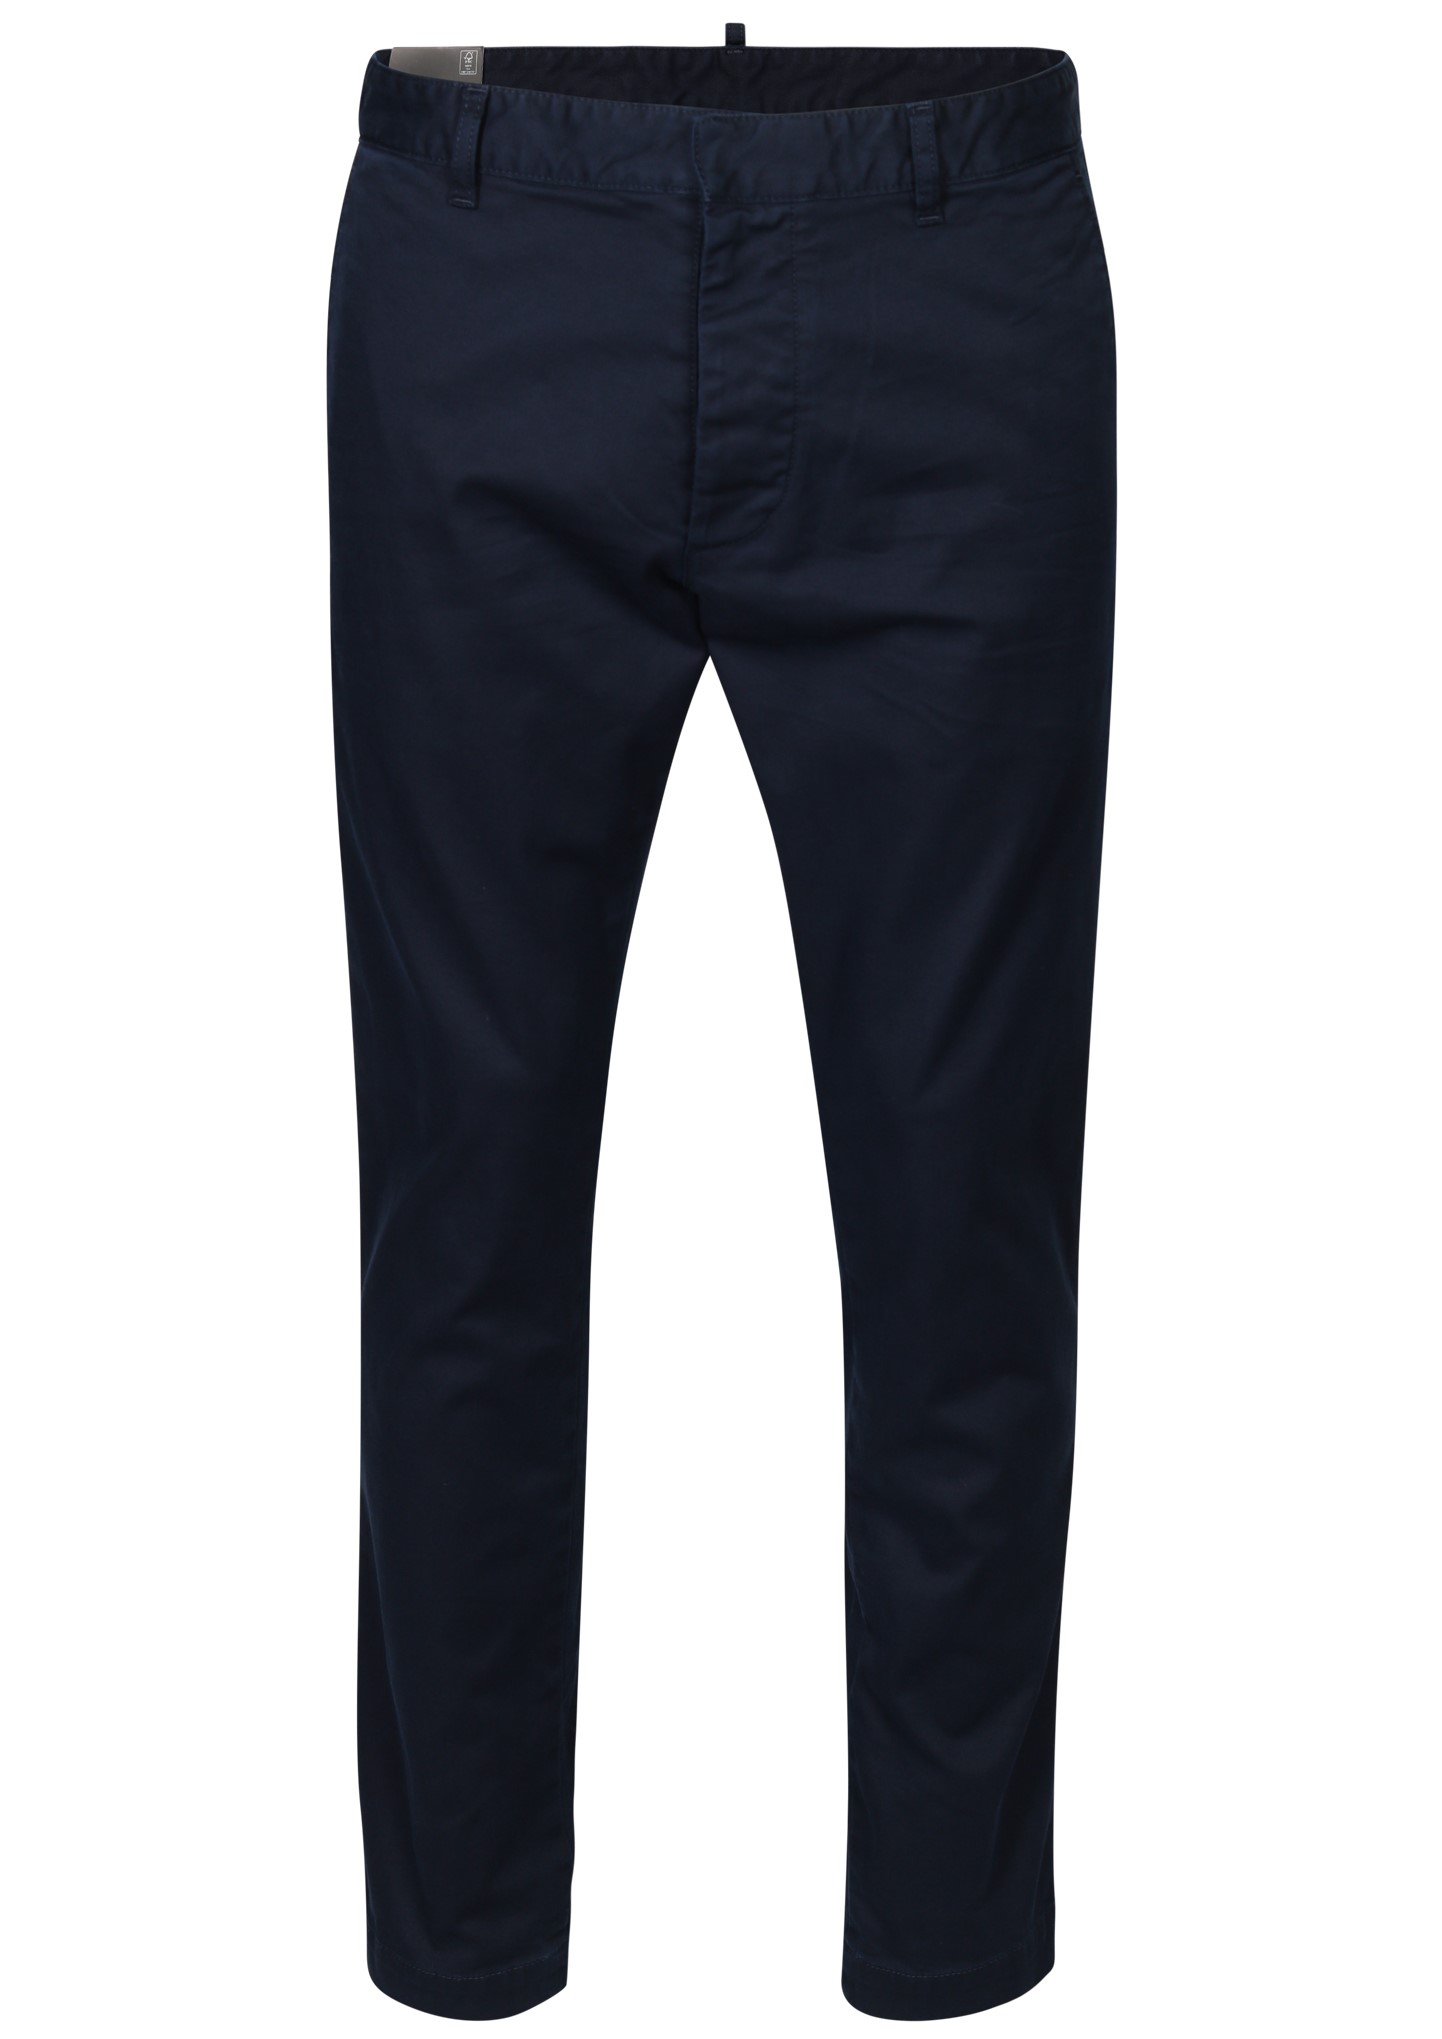 DSQUARED2 Cool Guy Chino Pant in Navy 54